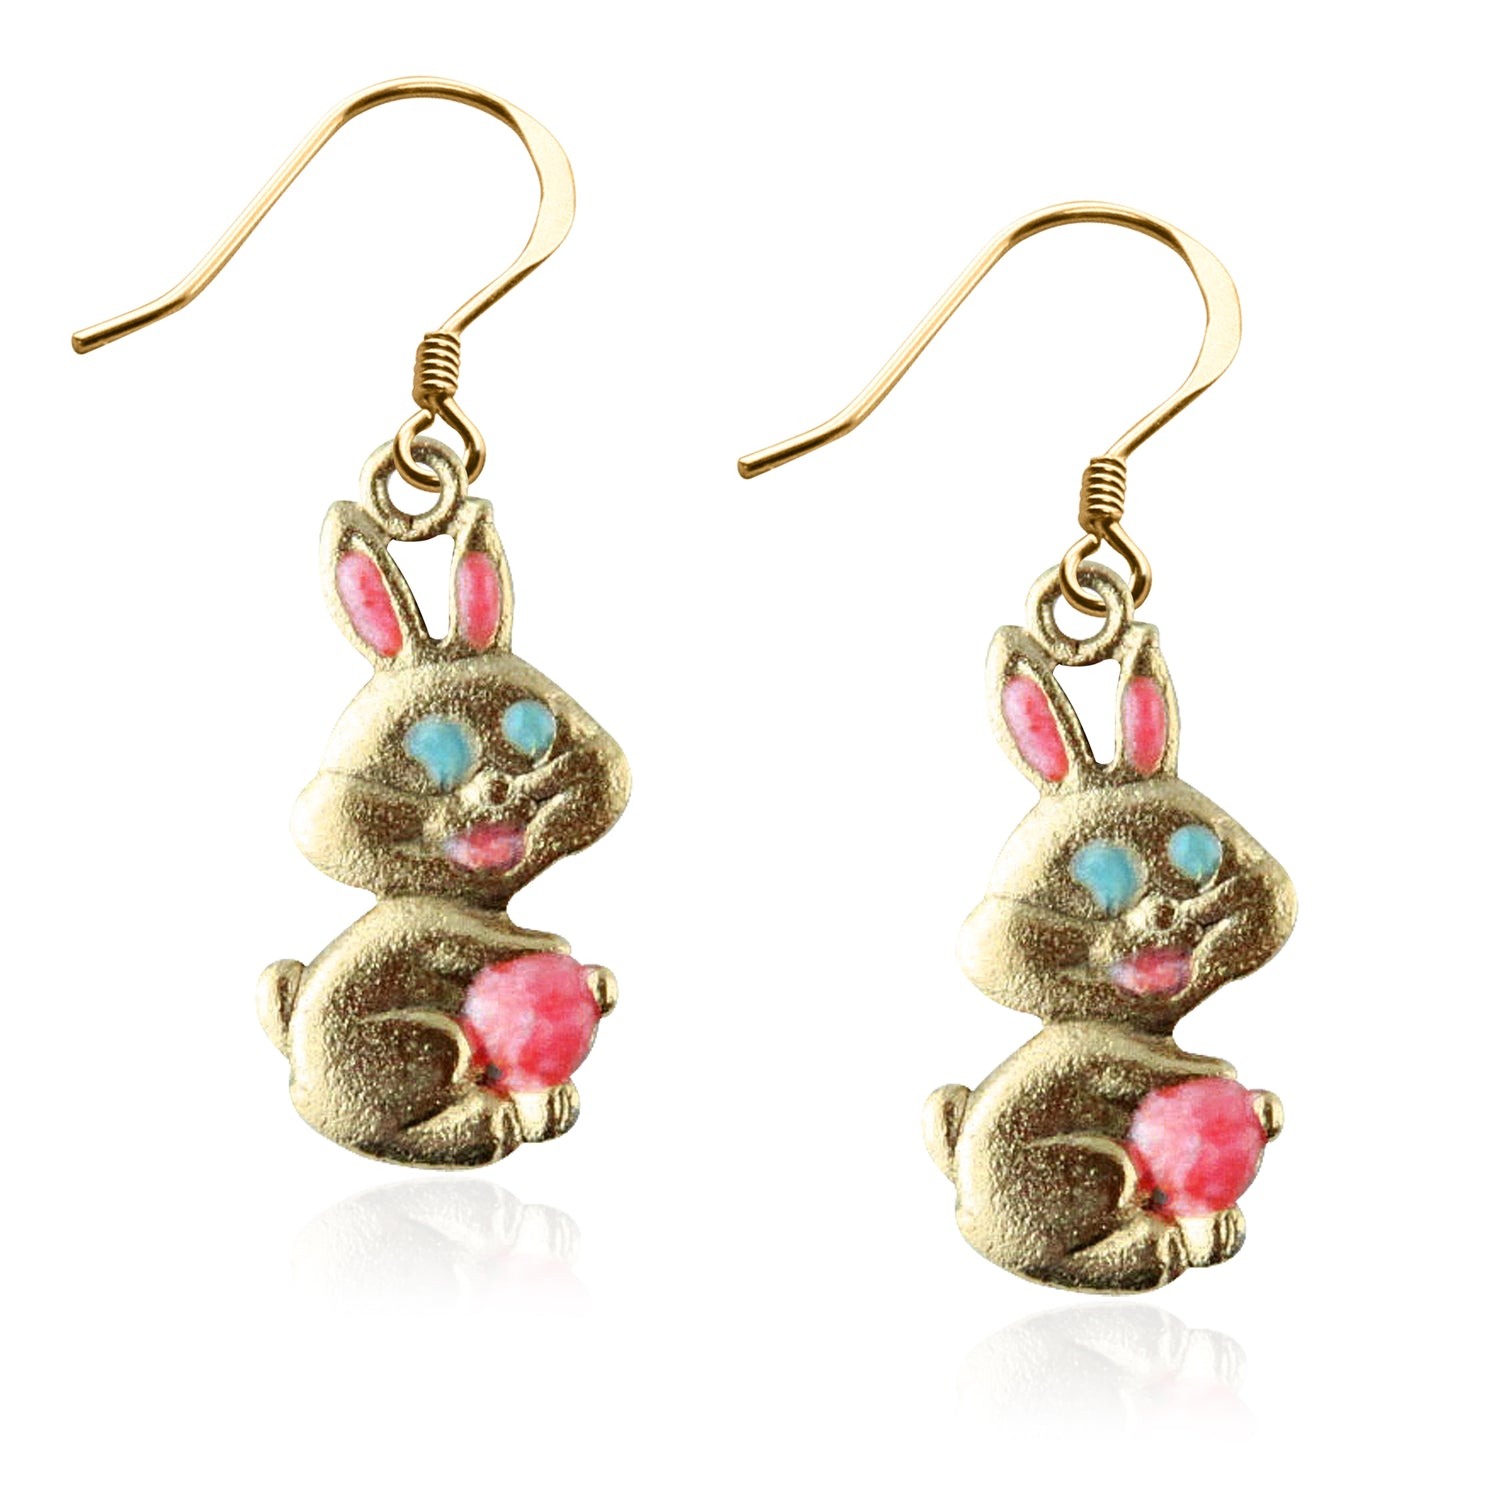 Whimsical Gifts | Easter Bunny Charm Earrings in Gold Finish | Holiday & Seasonal Themed | Easter | Jewelry